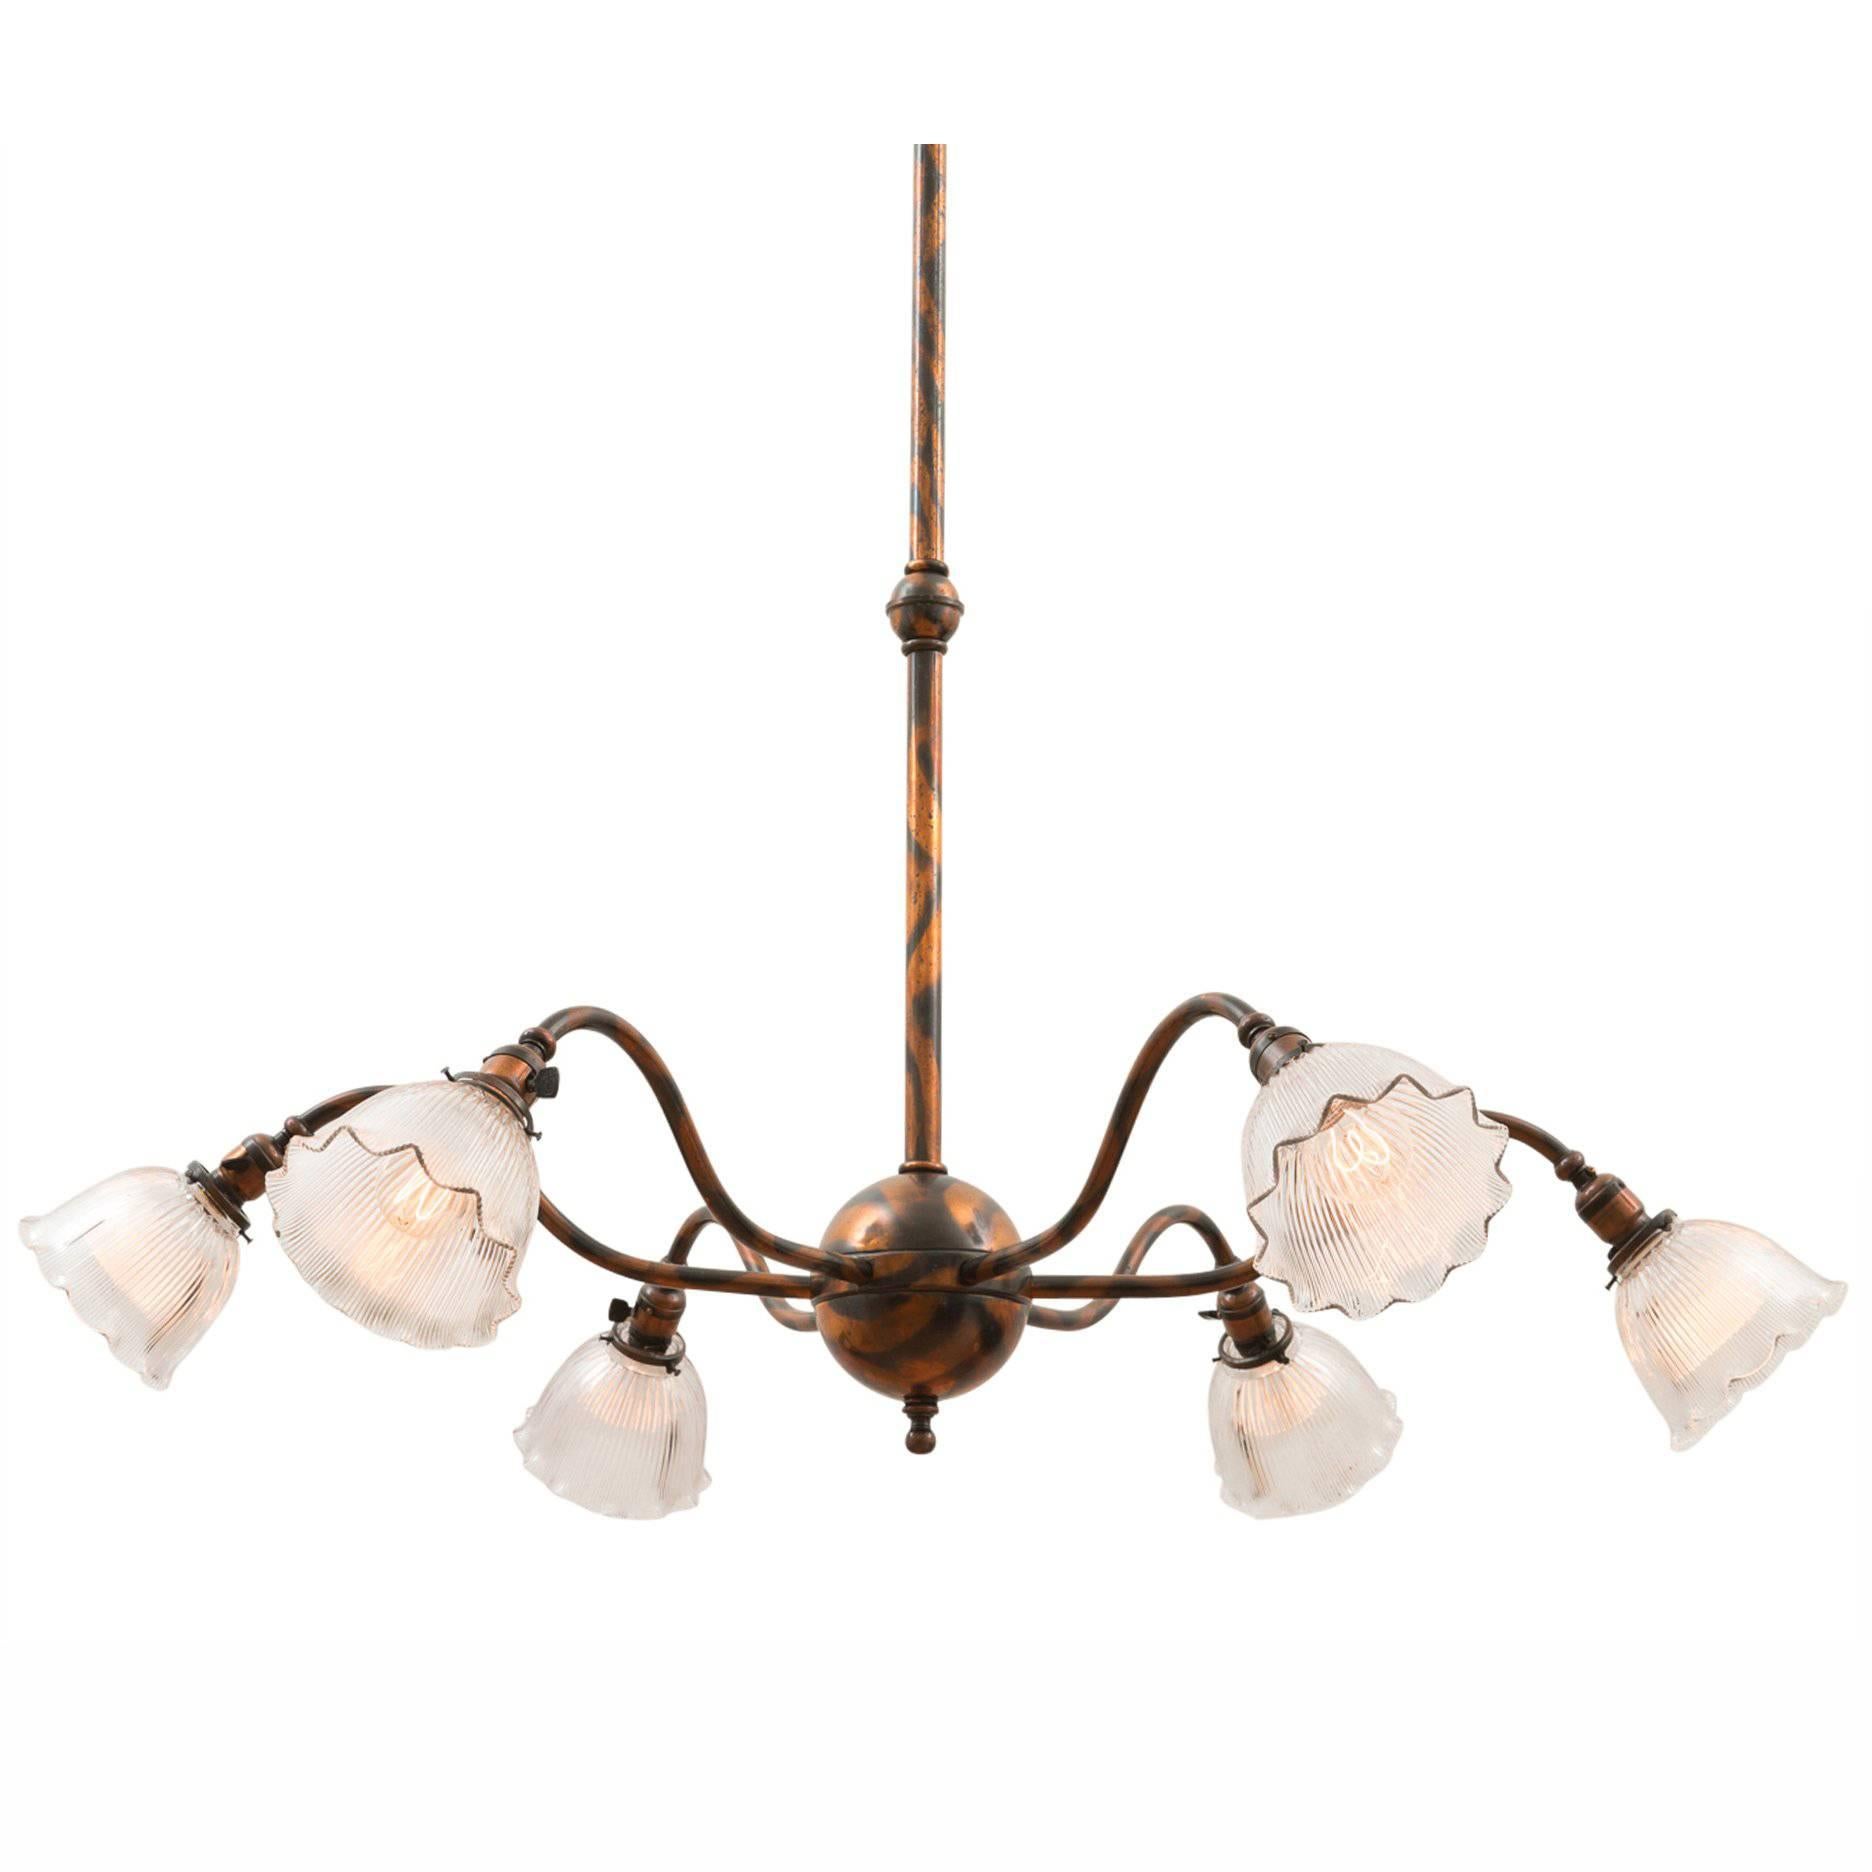 Enormous Early Electric Chandelier with Japanned Copper Finish, circa 1910 For Sale